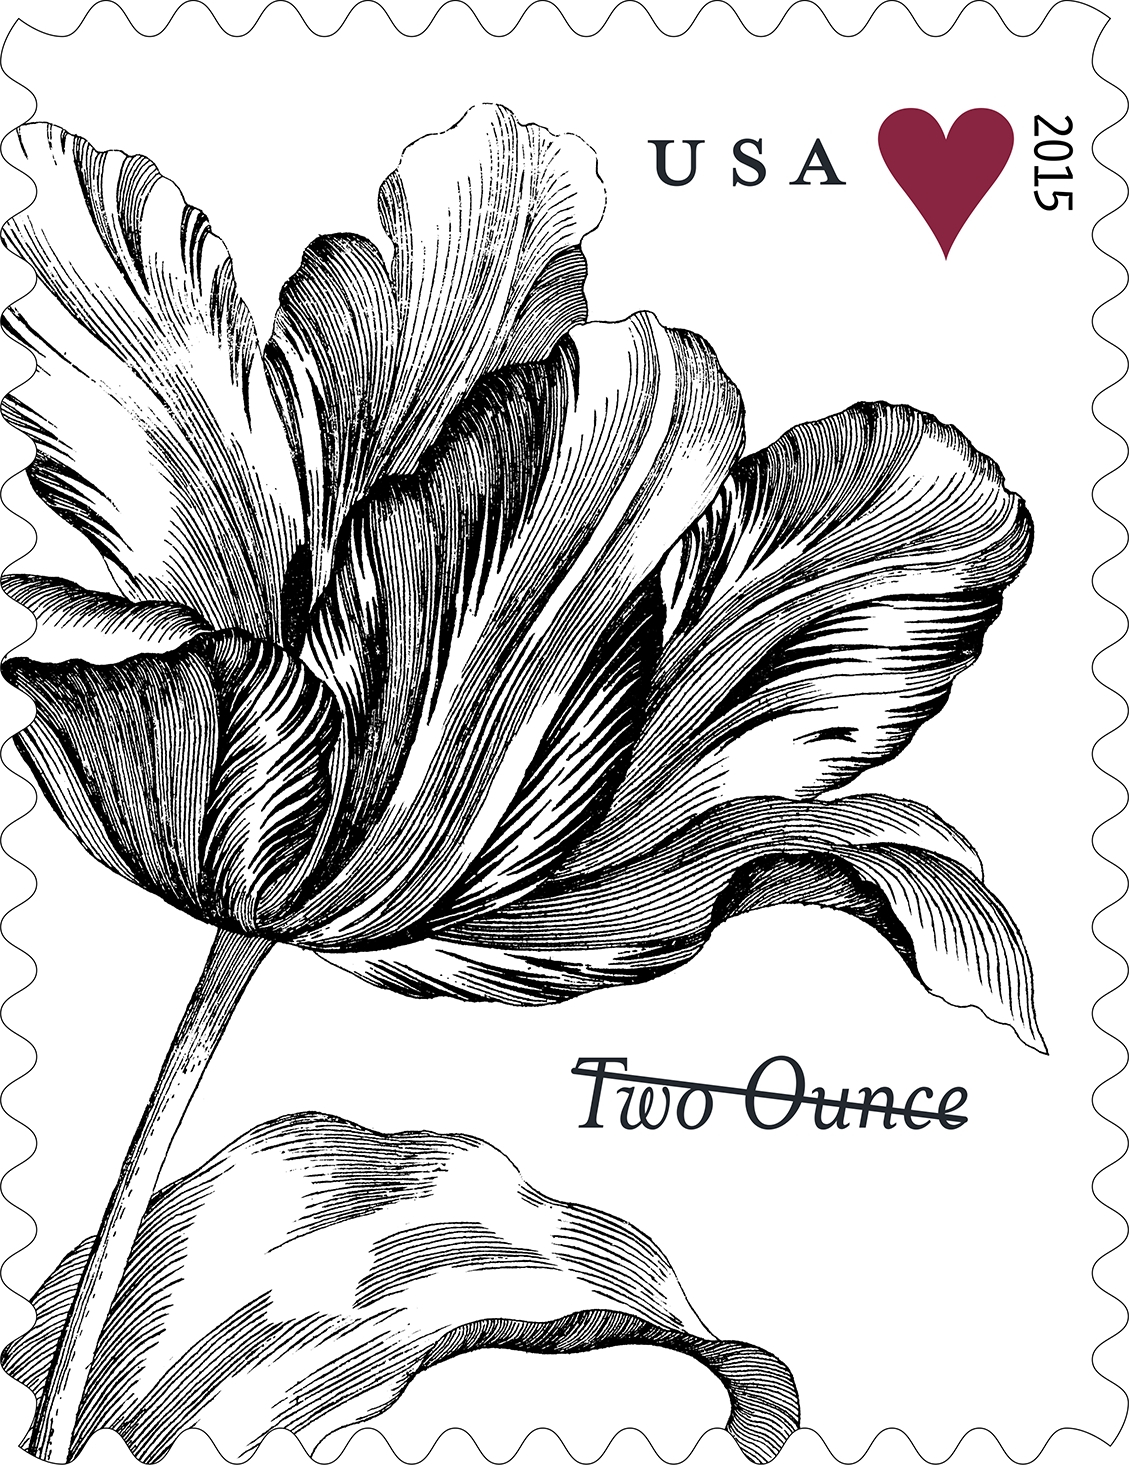 USPS New Issues 2015 (Stamp News Now)